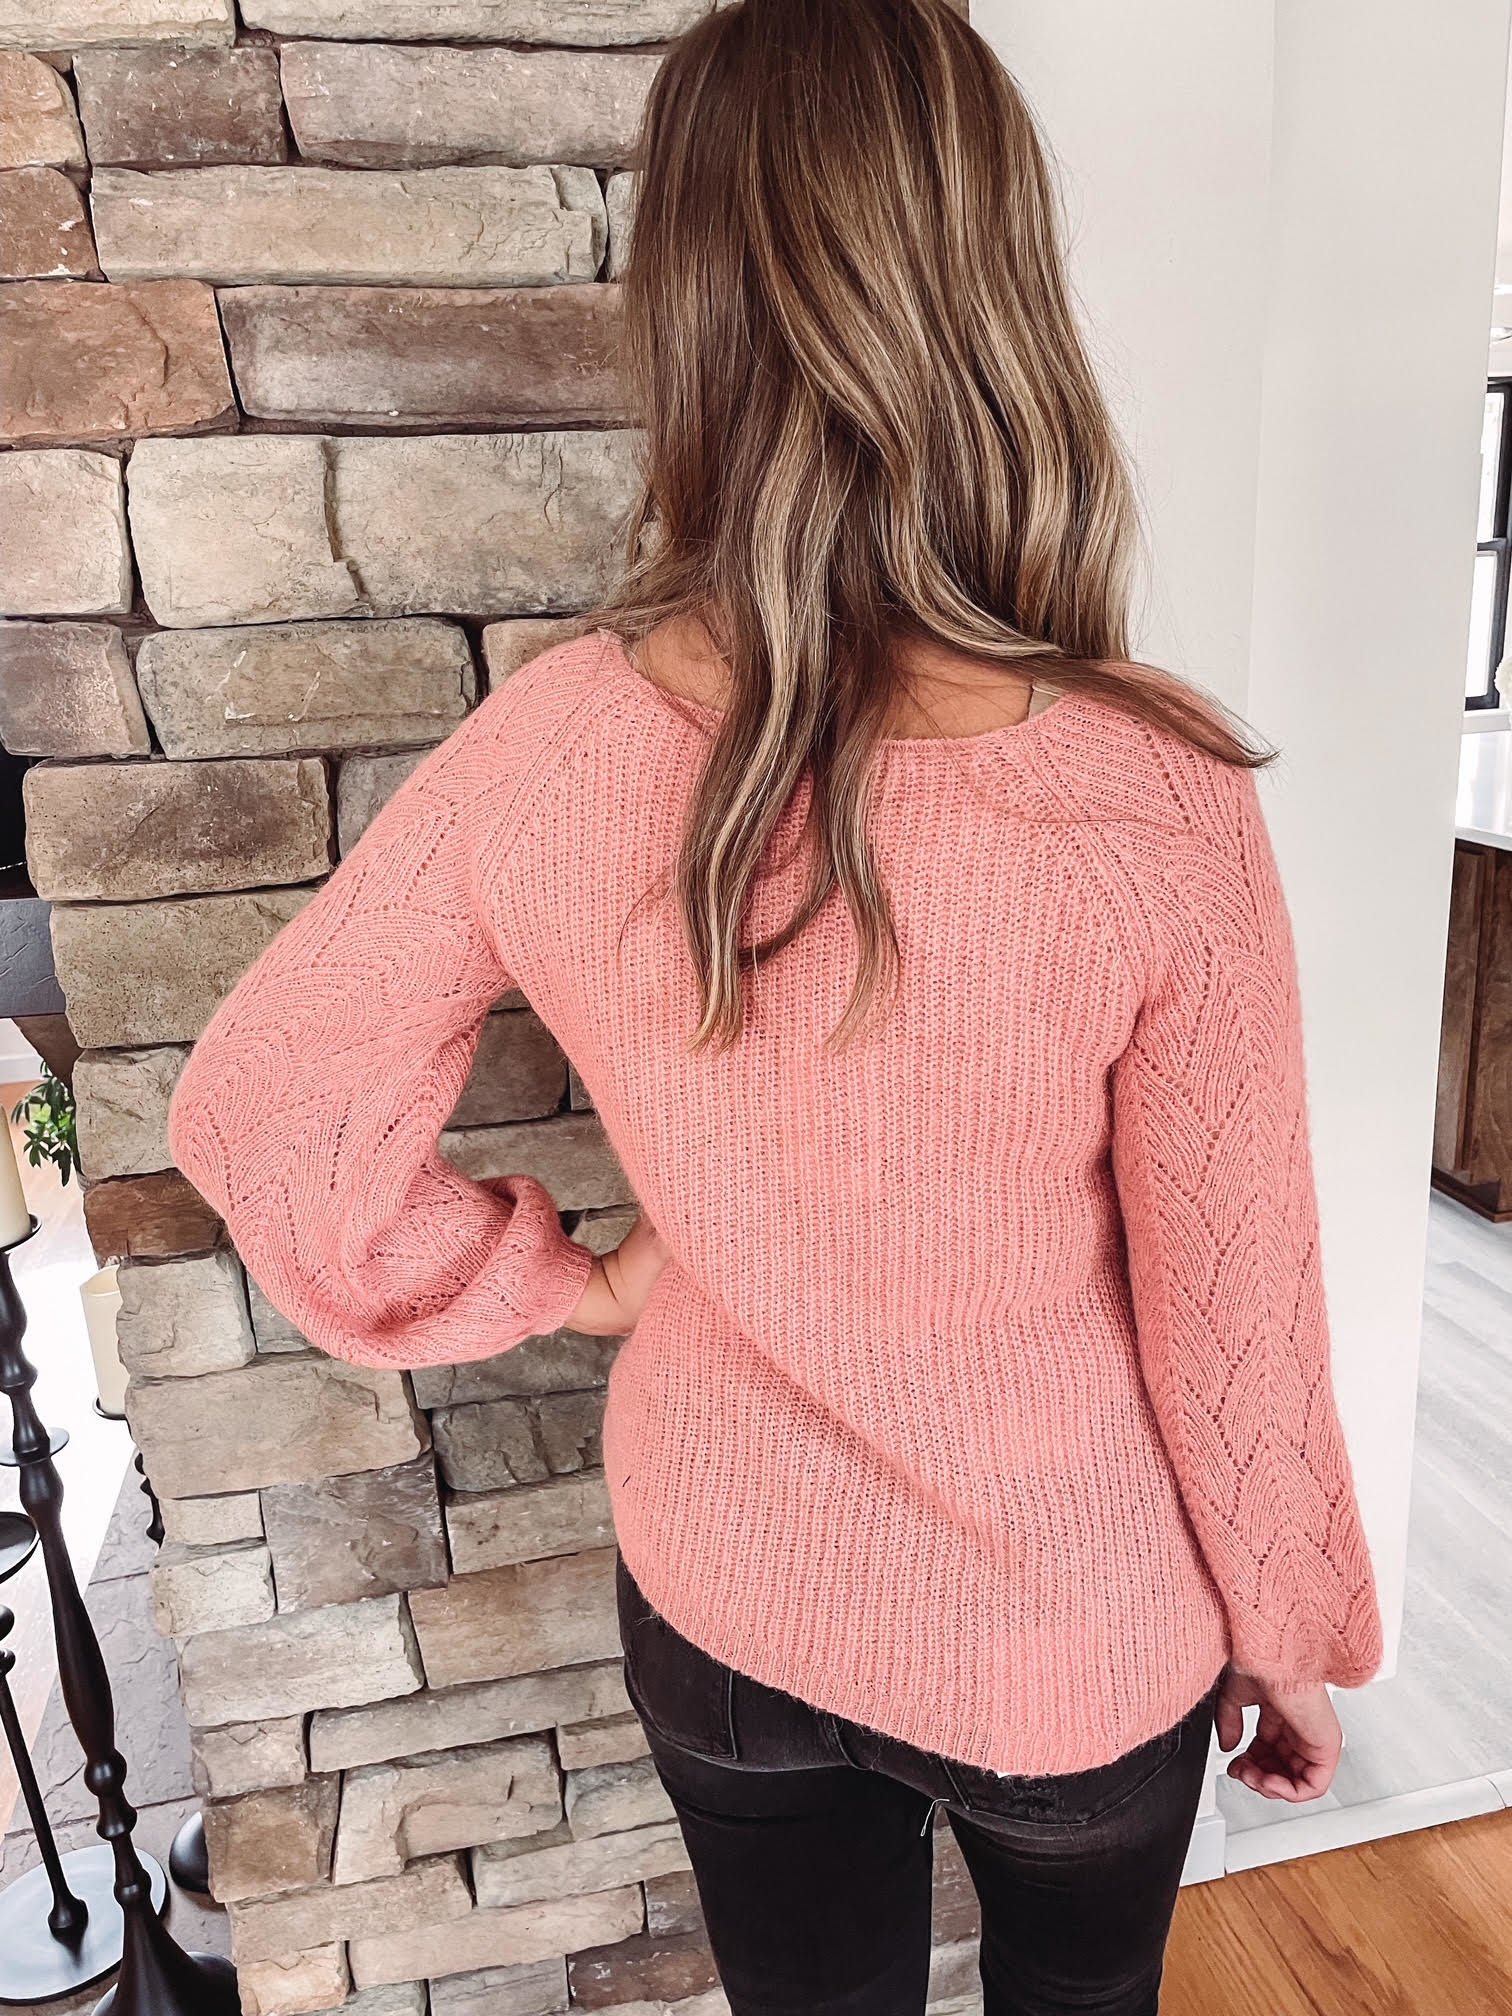 Abby Apricot Sweater